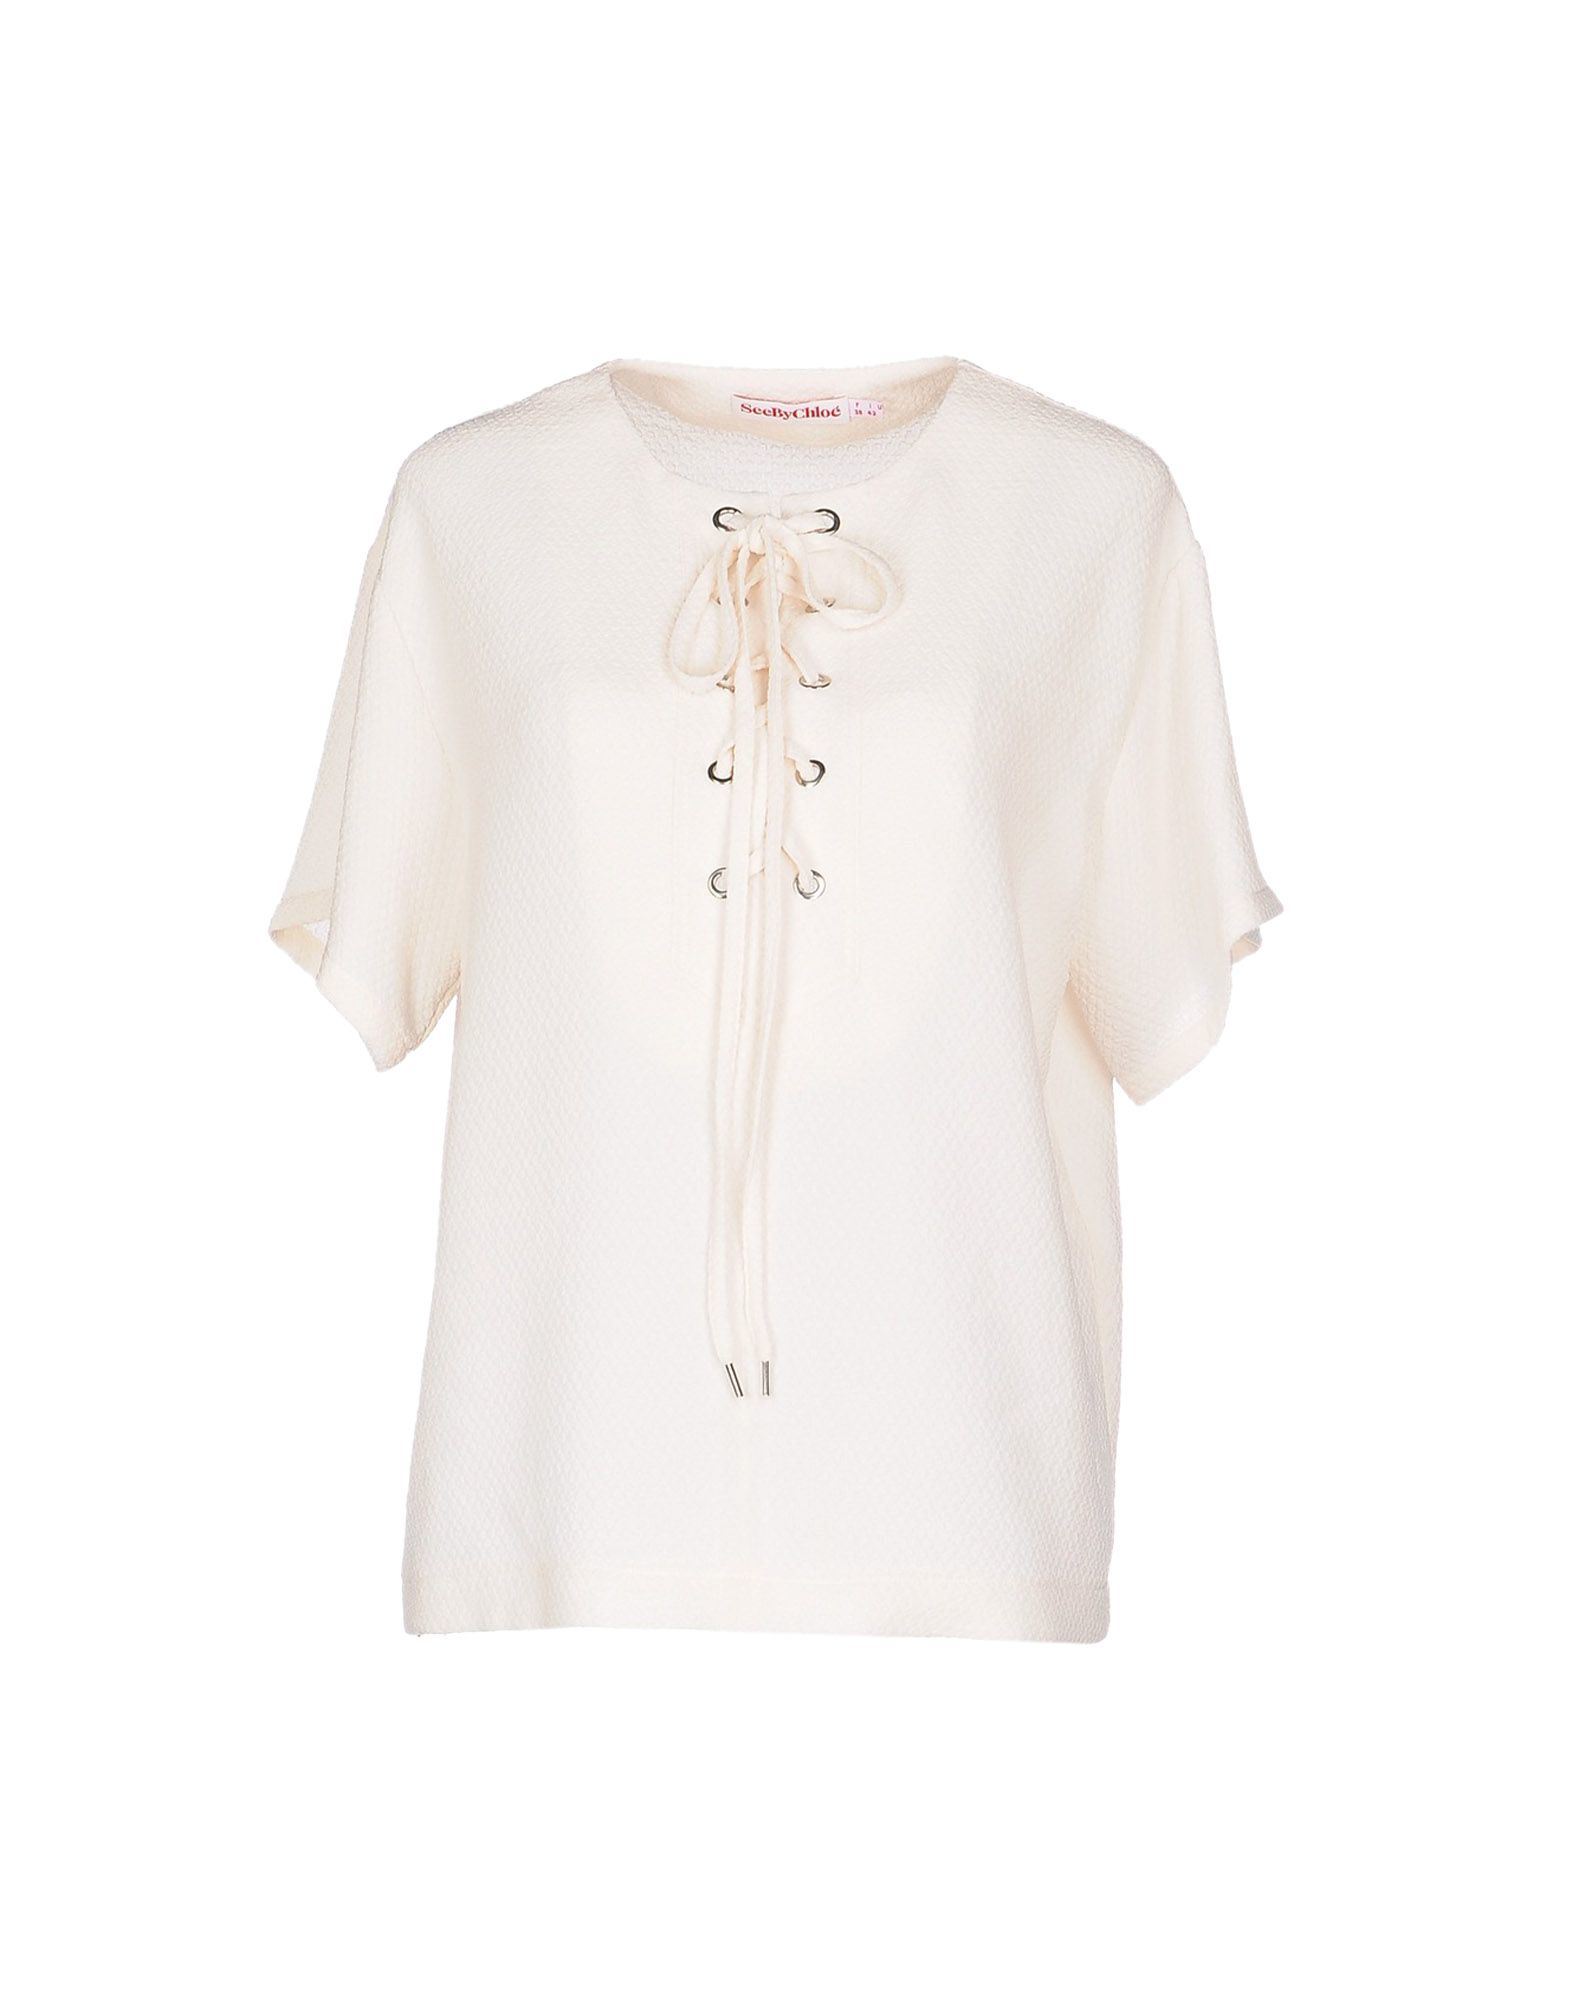 See by chloé Blouse in Beige (Ivory) - Save 58% | Lyst